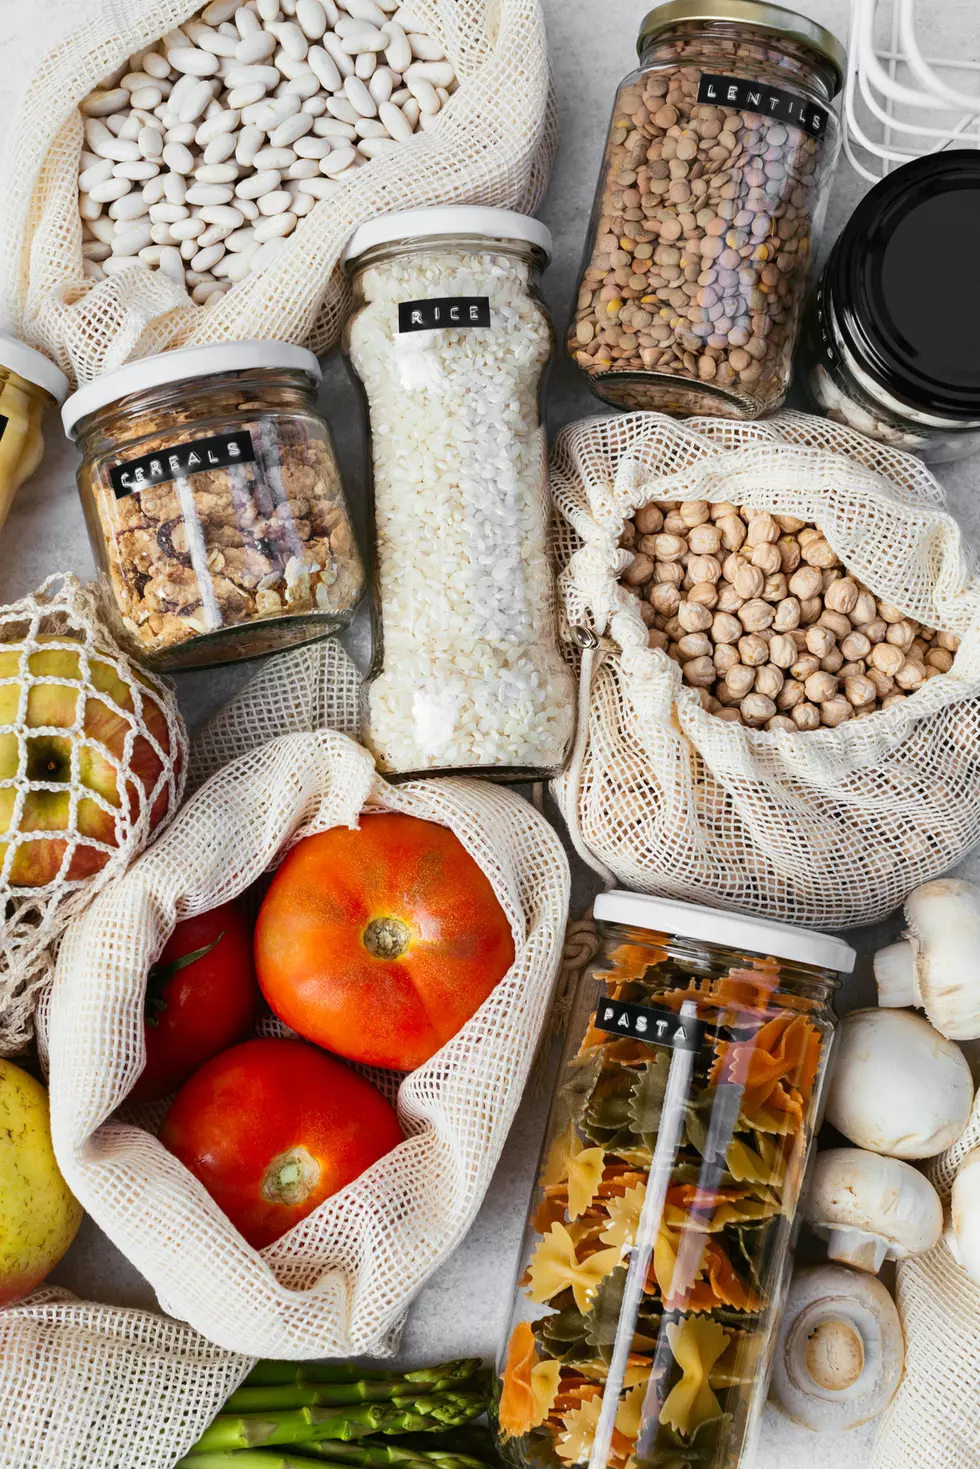 7 Plant-Based Essentials to Stock Your Pantry and Freezer